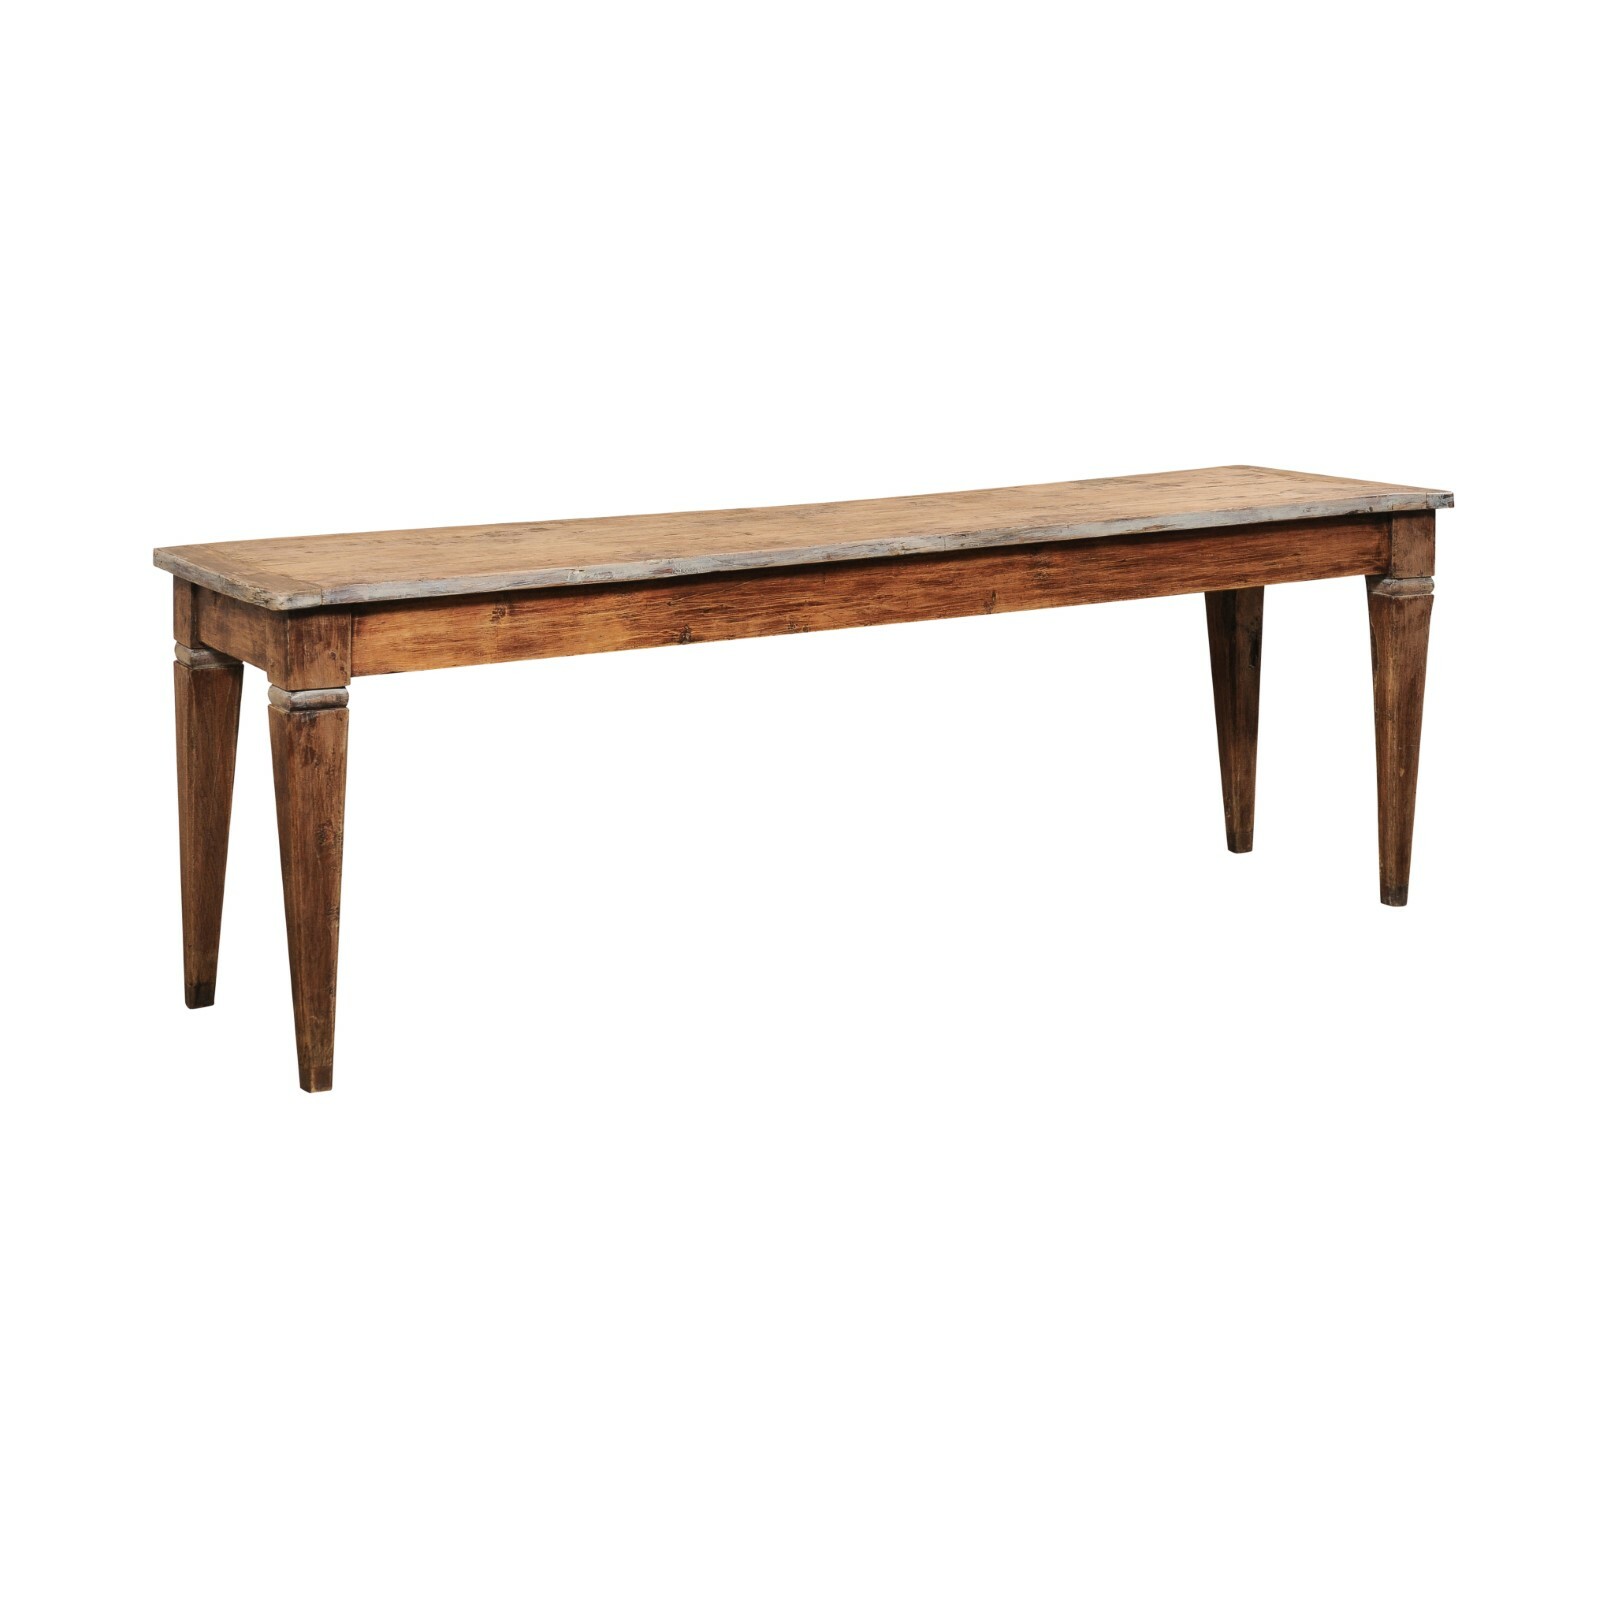 18th C. Italian Rustic Wooden Console Table